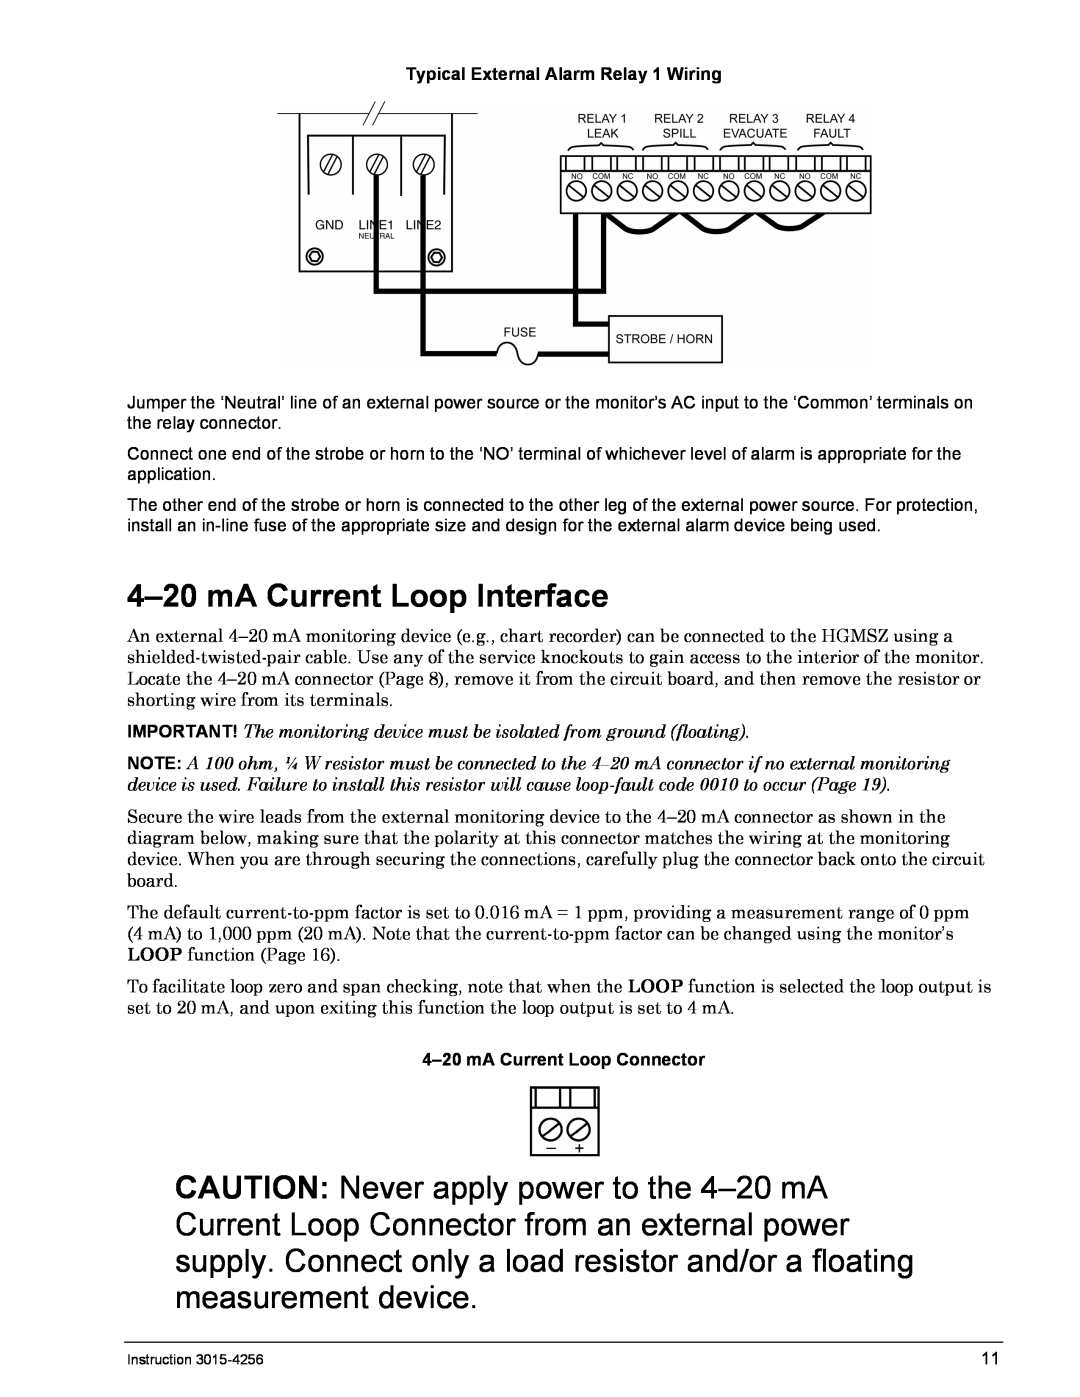 Bacharach 3015-4256 4-20mA Current Loop Interface, Typical External Alarm Relay 1 Wiring, 4-20mA Current Loop Connector 